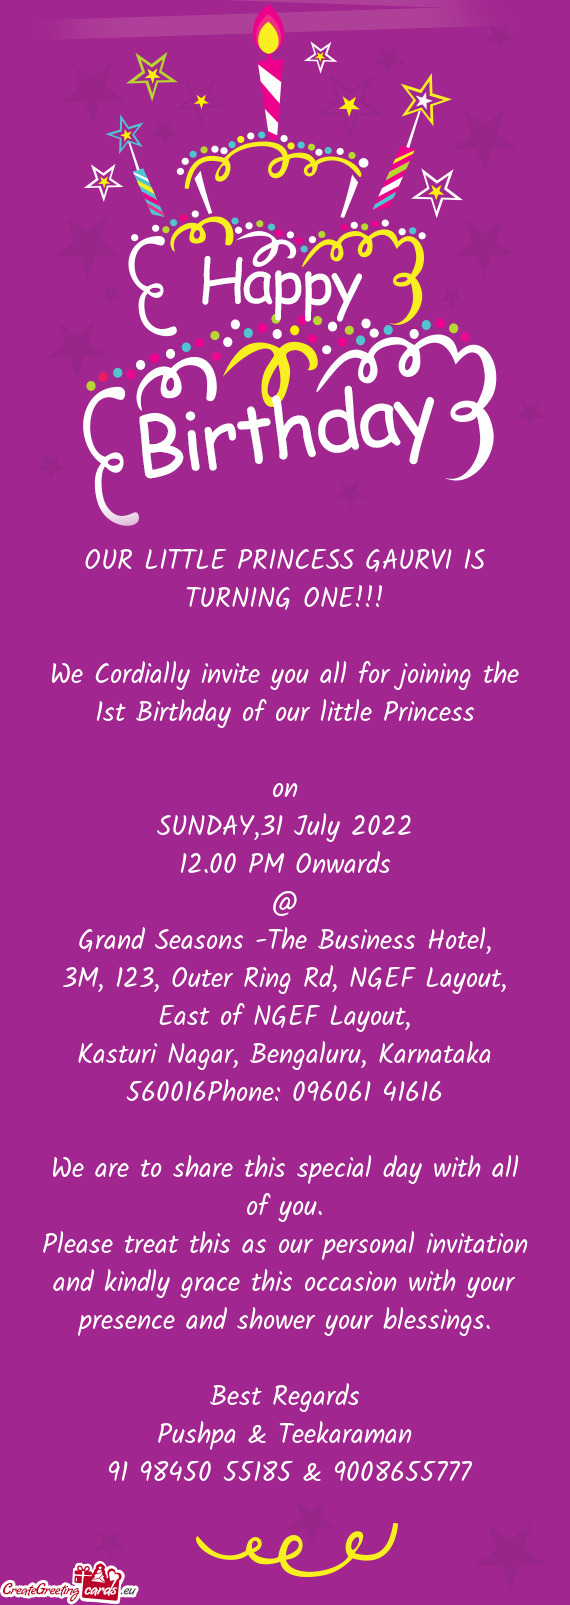 OUR LITTLE PRINCESS GAURVI IS TURNING ONE